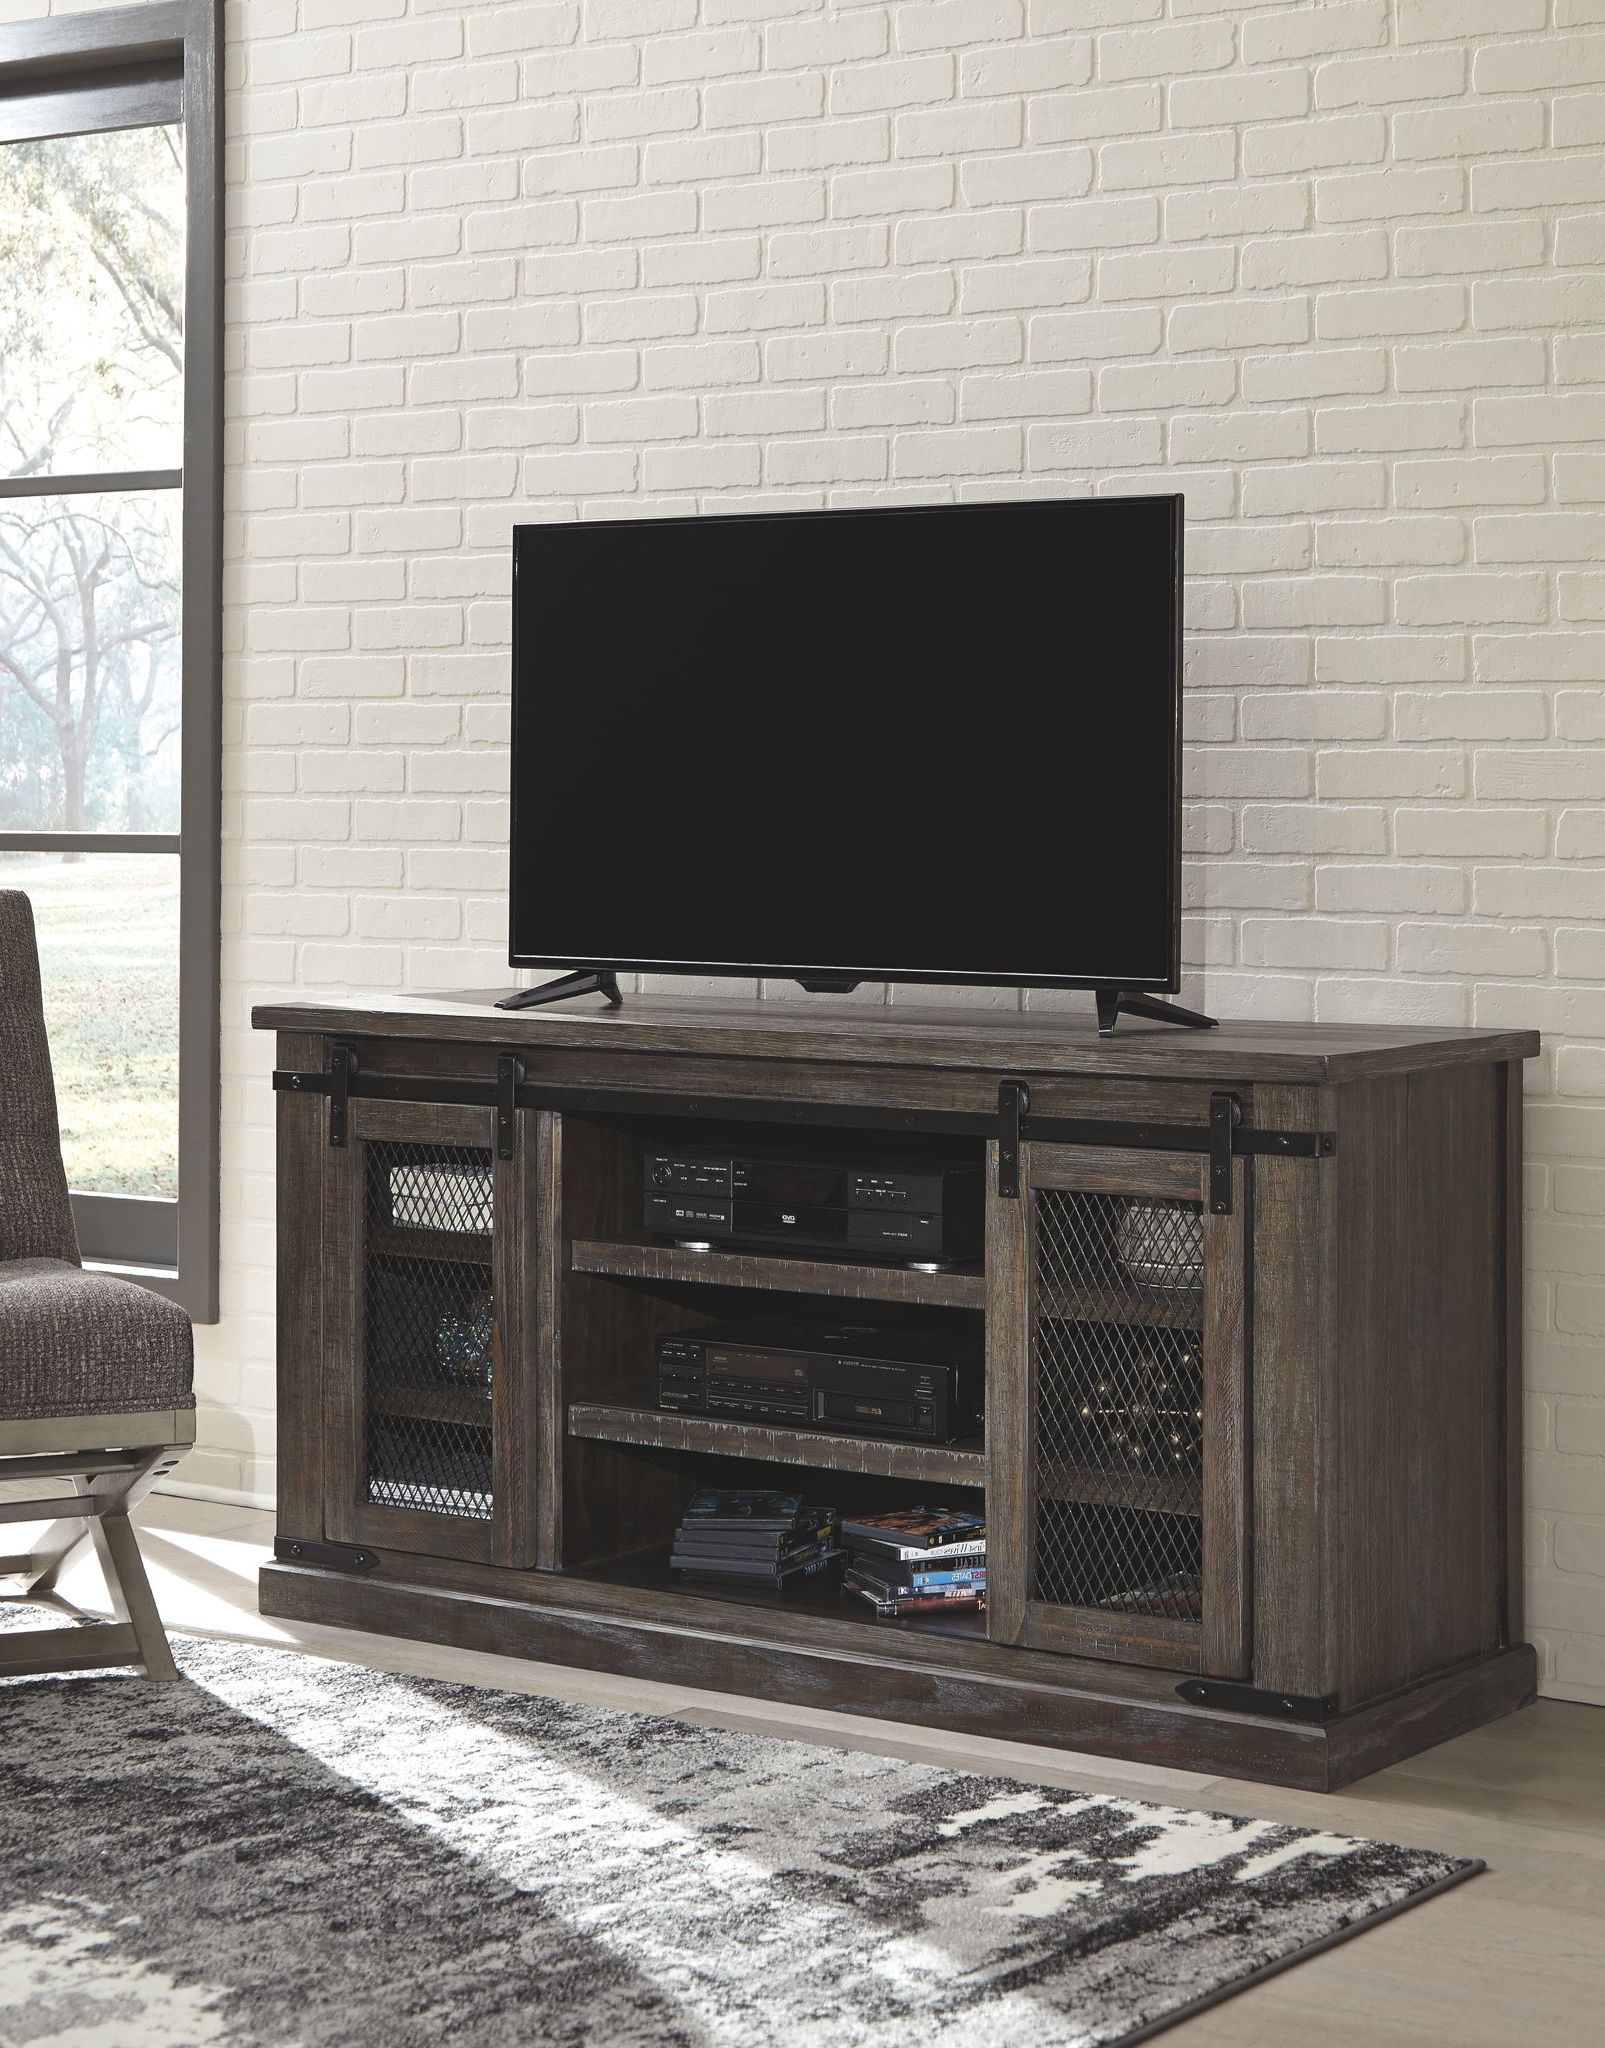 Well Liked Kado Corner Metal Mesh Doors Tv Stands Within Danell Ridge – Brown – Large Tv Stand (View 5 of 10)